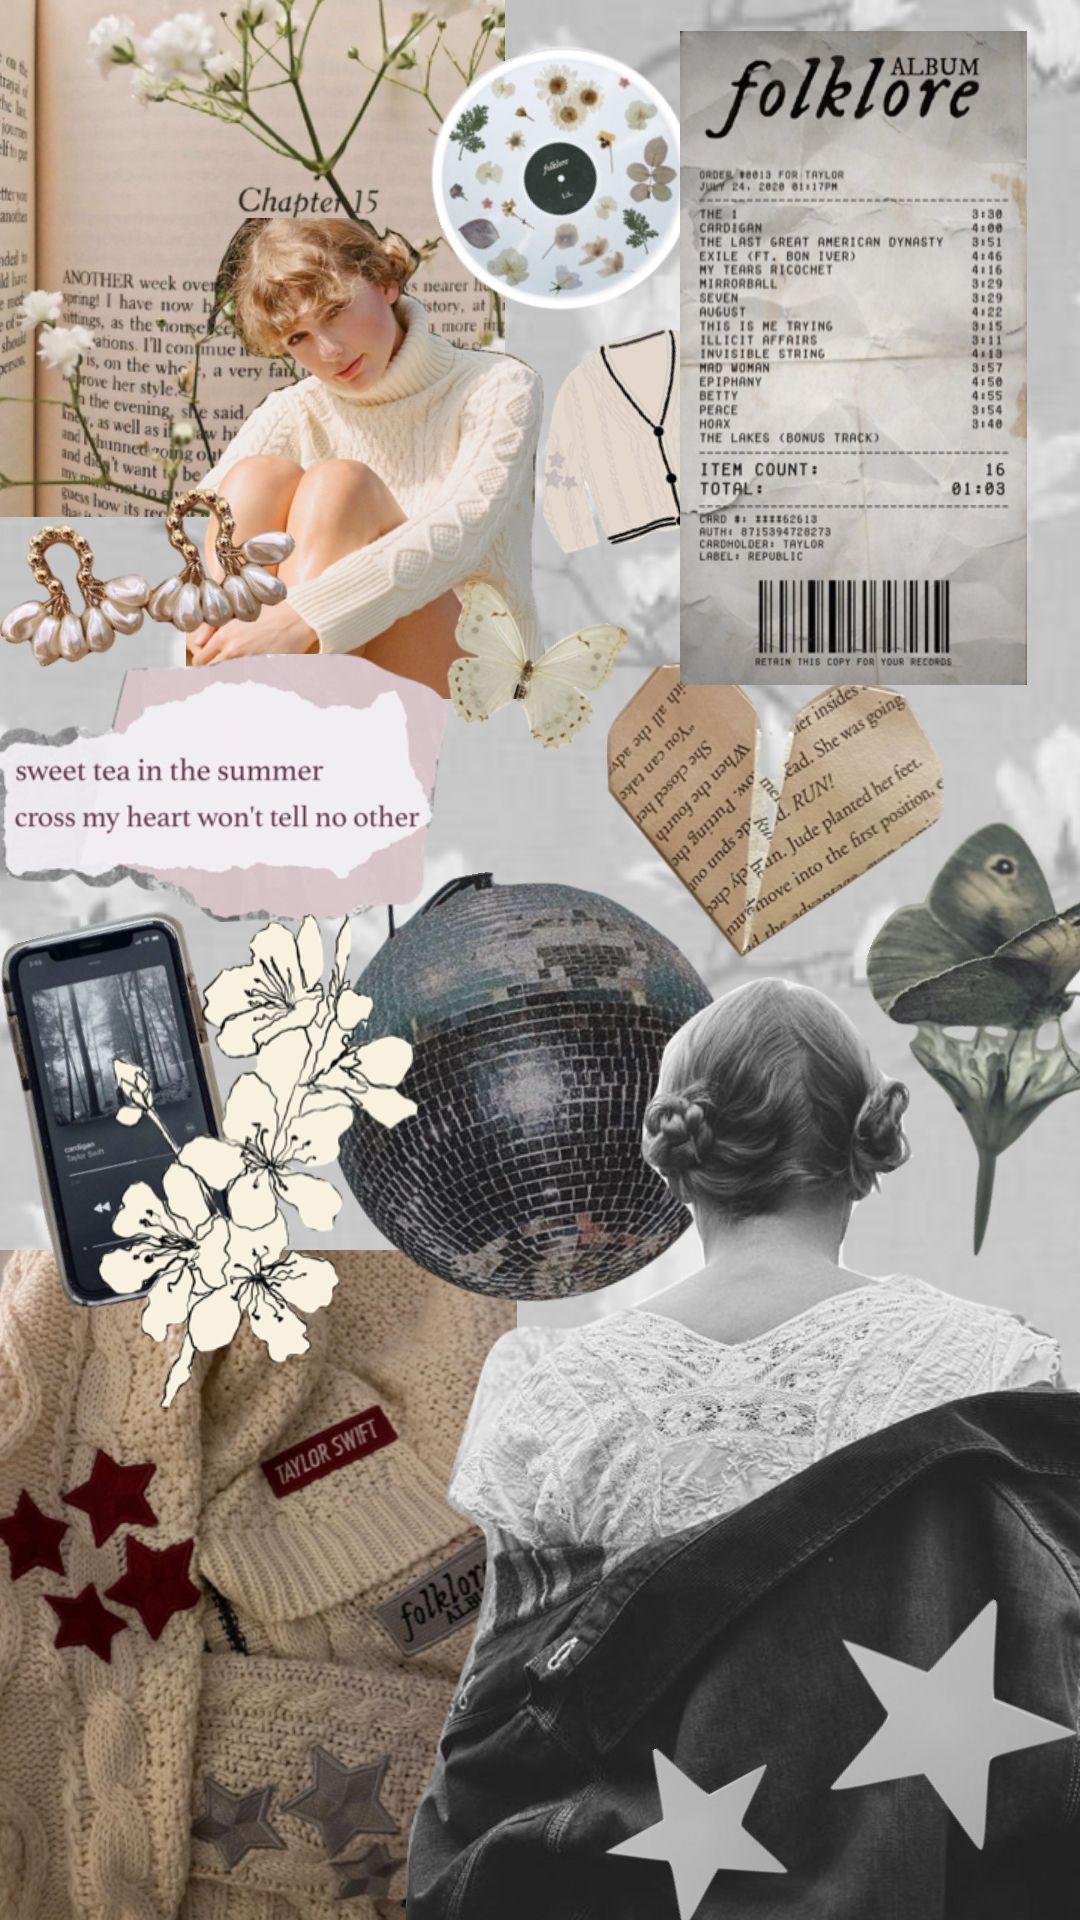 Aesthetic collage for Taylor Swift's album 